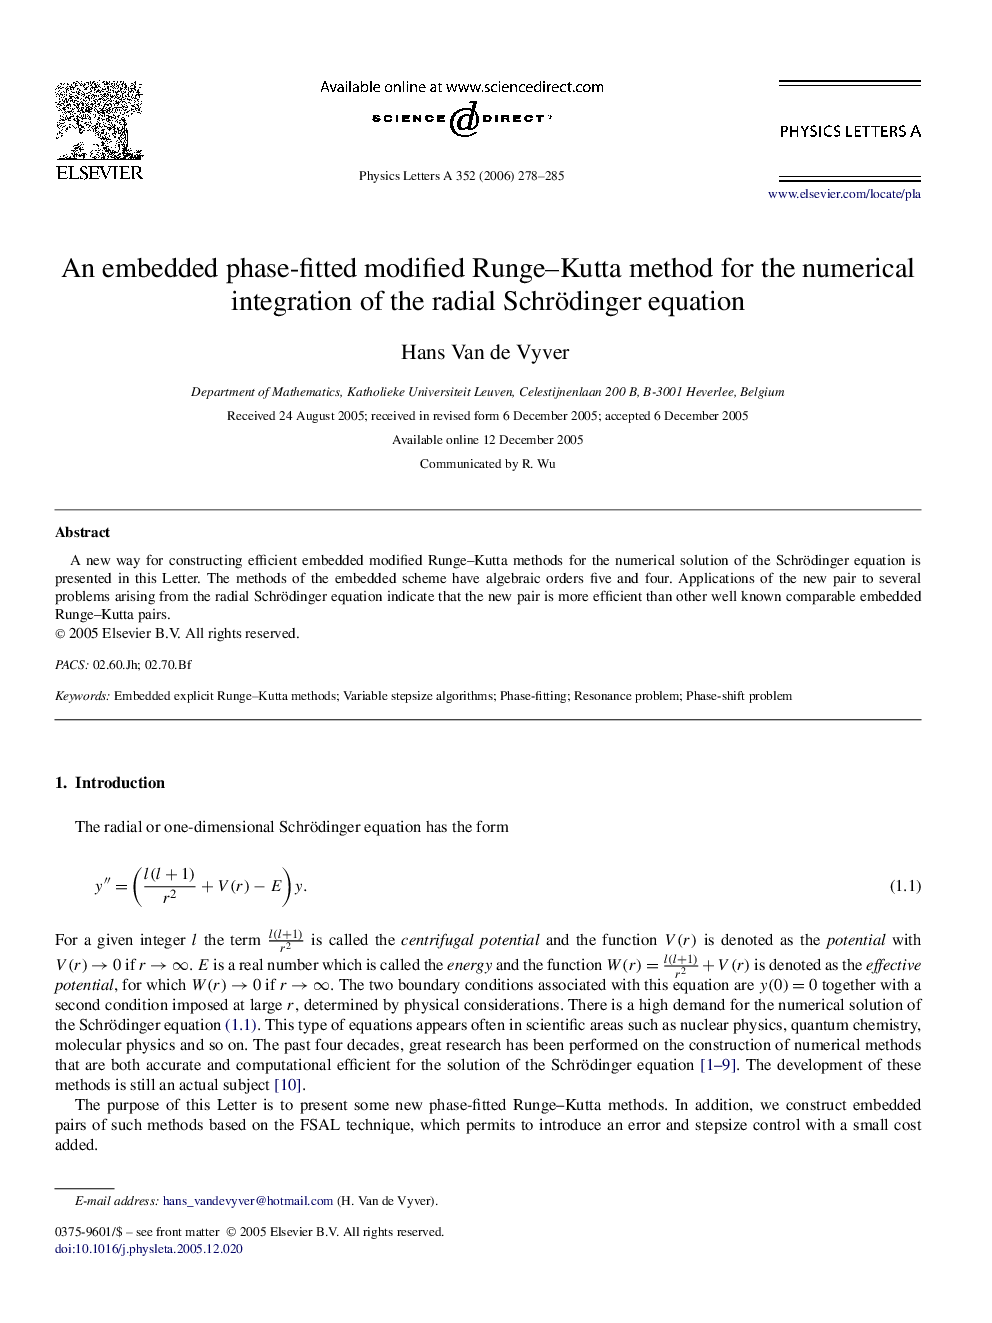 An embedded phase-fitted modified Runge-Kutta method for the numerical integration of the radial Schrödinger equation